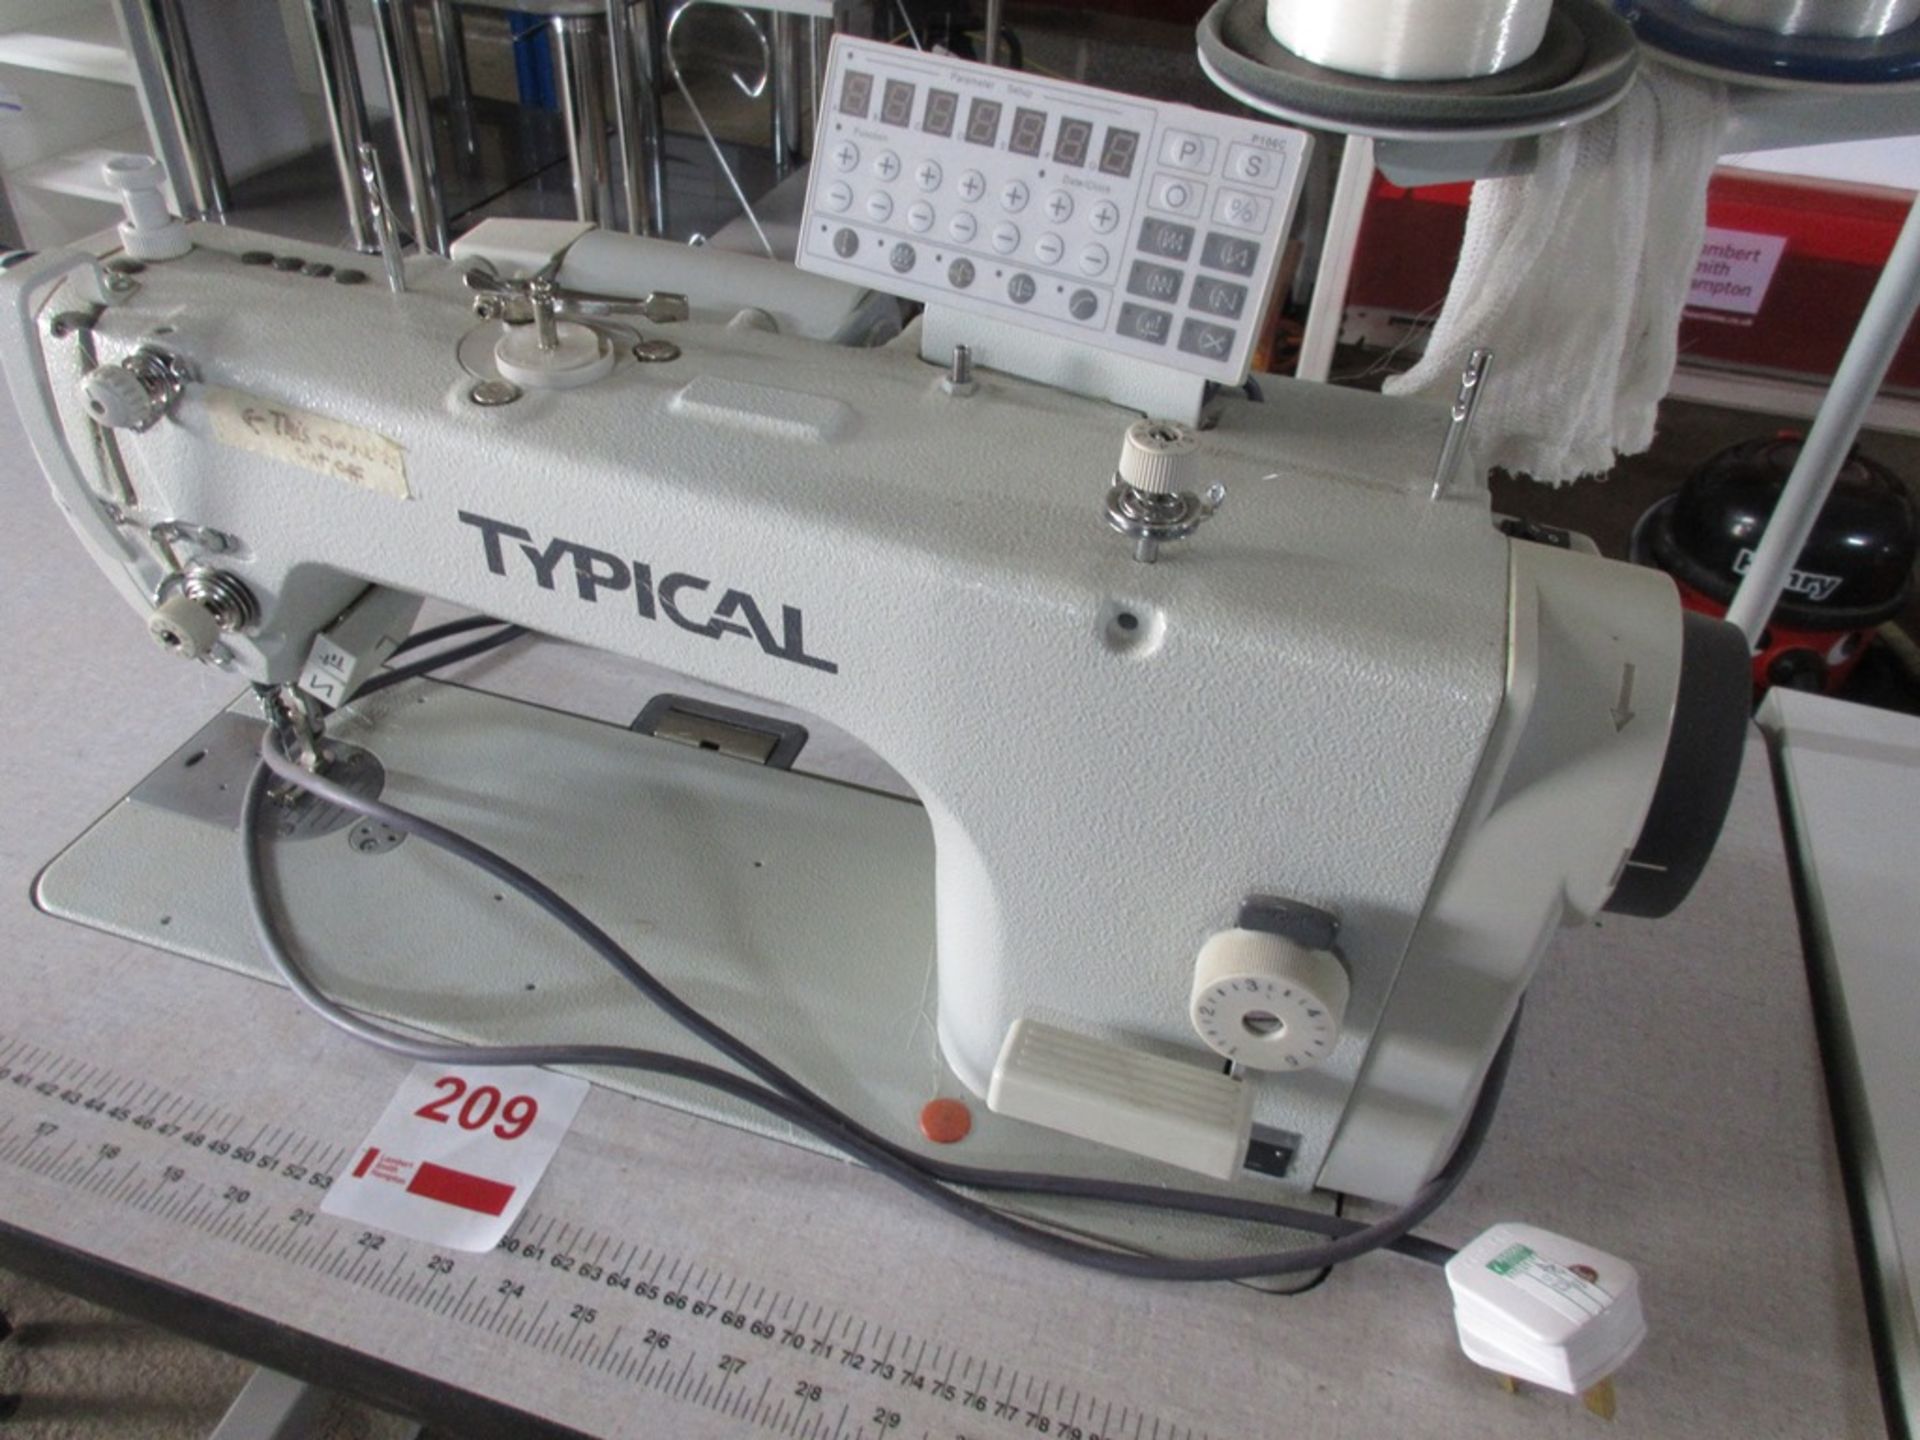 Typical GC6730A flat bed sewing machine, 240v